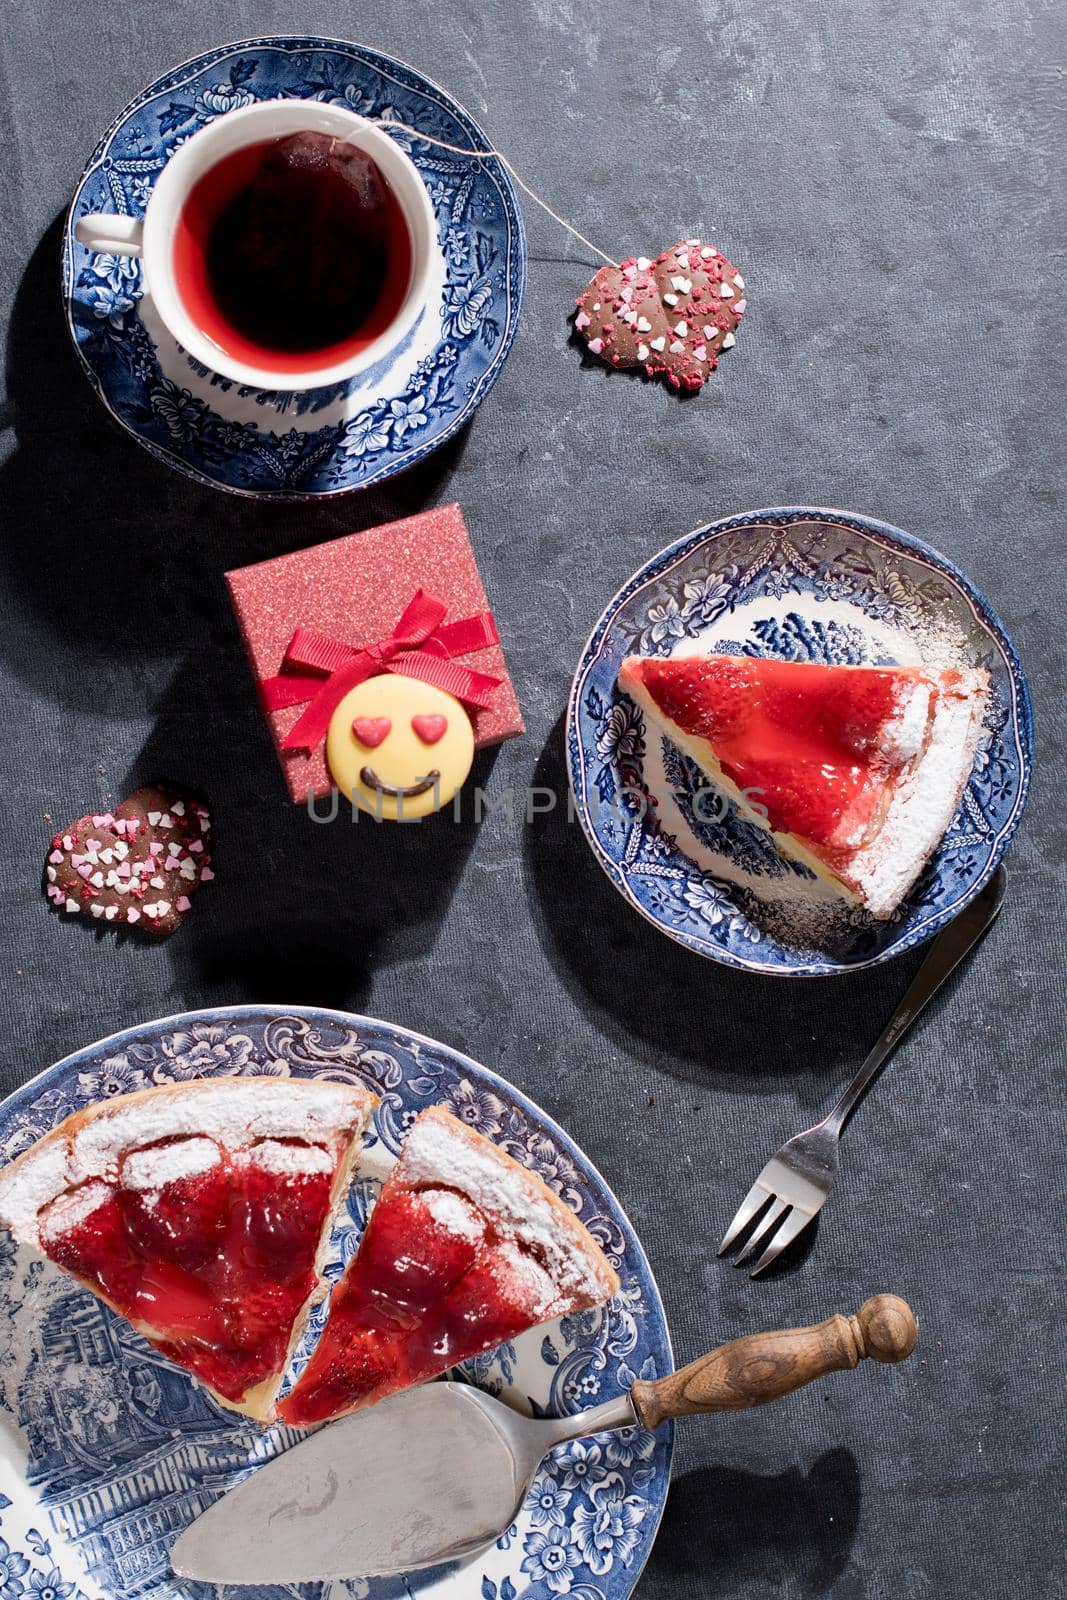 Valentines day, red strawberry pie on blue plates and a gift in a red box by KaterinaDalemans